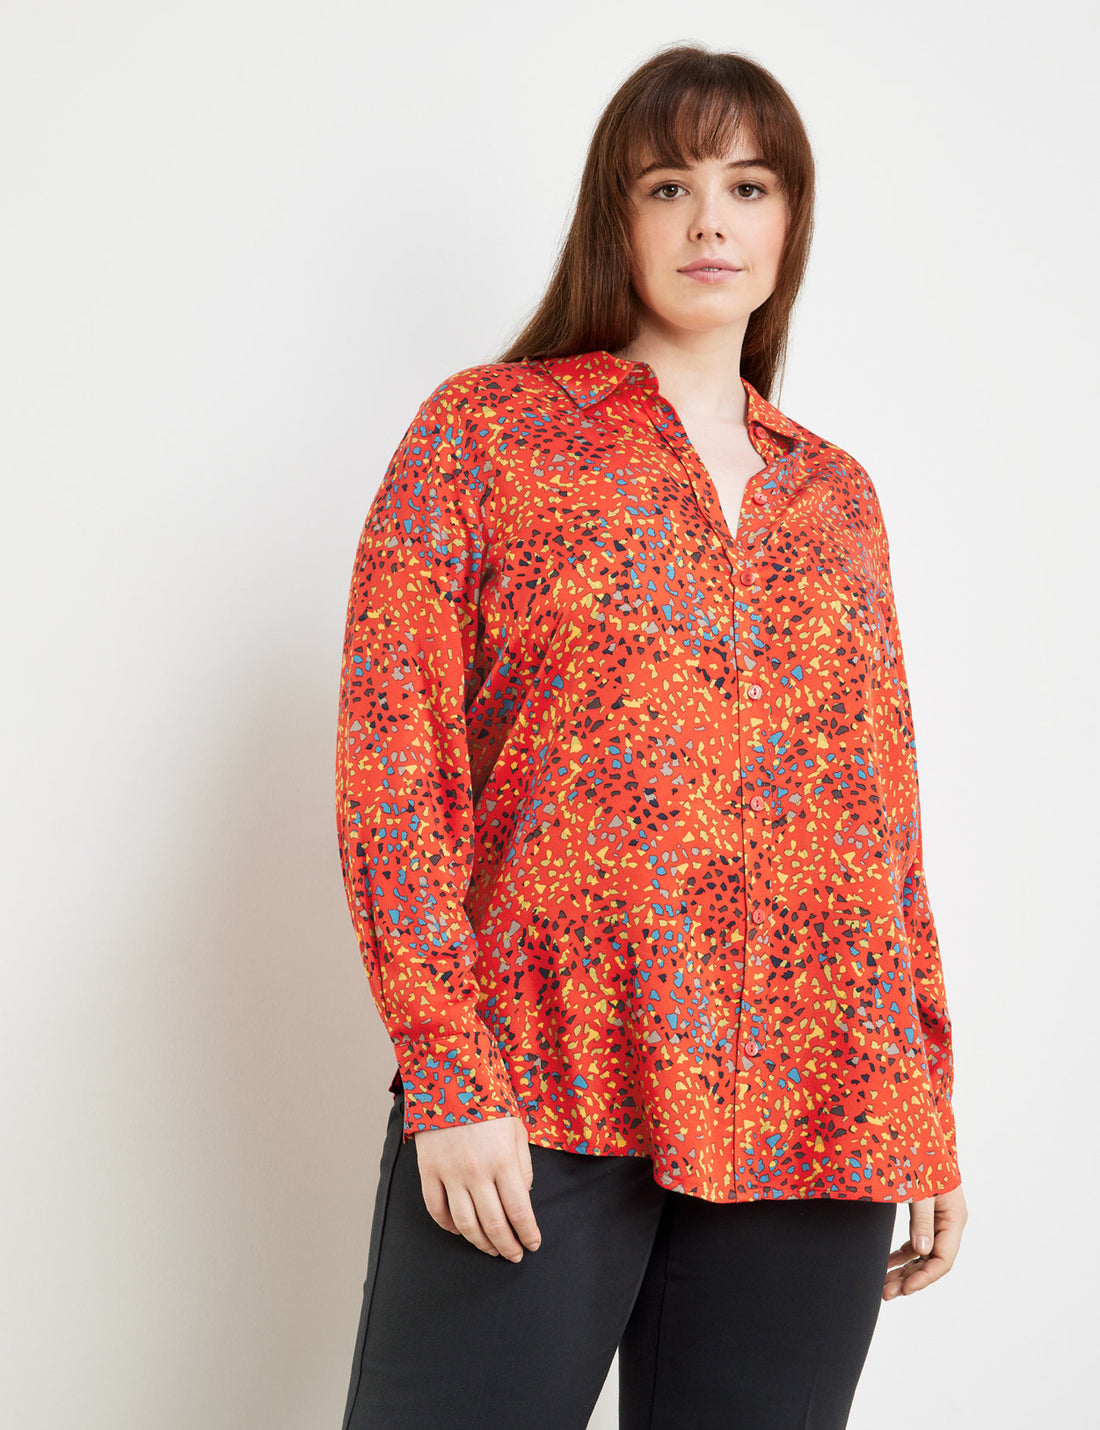 Shirt Blouse With An All-Over Print_360221-21230_6382_01